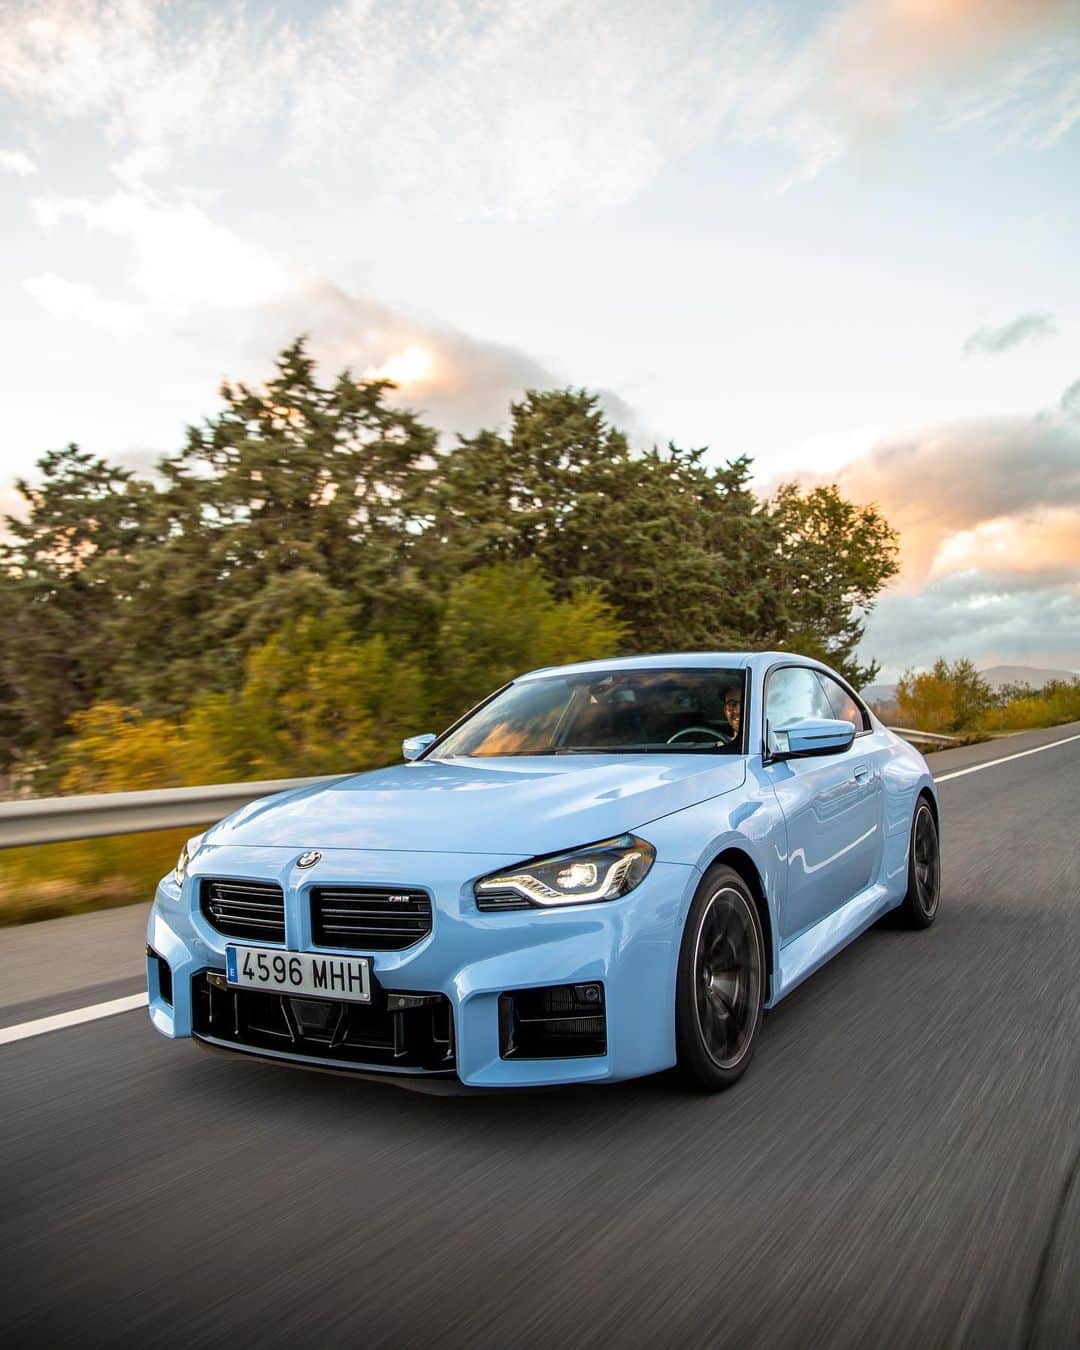 BMWのインスタグラム：「All aboard the powertrain 🏁 📸: @bmw.bymycar.madrid @alvaroiglesiass #BMWRepost The BMW M2. #THEM2 #BMWM #M2 #BMW #MPower __ BMW M2: Combined fuel consumption: 10.2–9.6 l/100 km. Combined CO2 emissions: 231–218 g/km. All data according to WLTP. Further info: www.bmw.com/disclaimer」